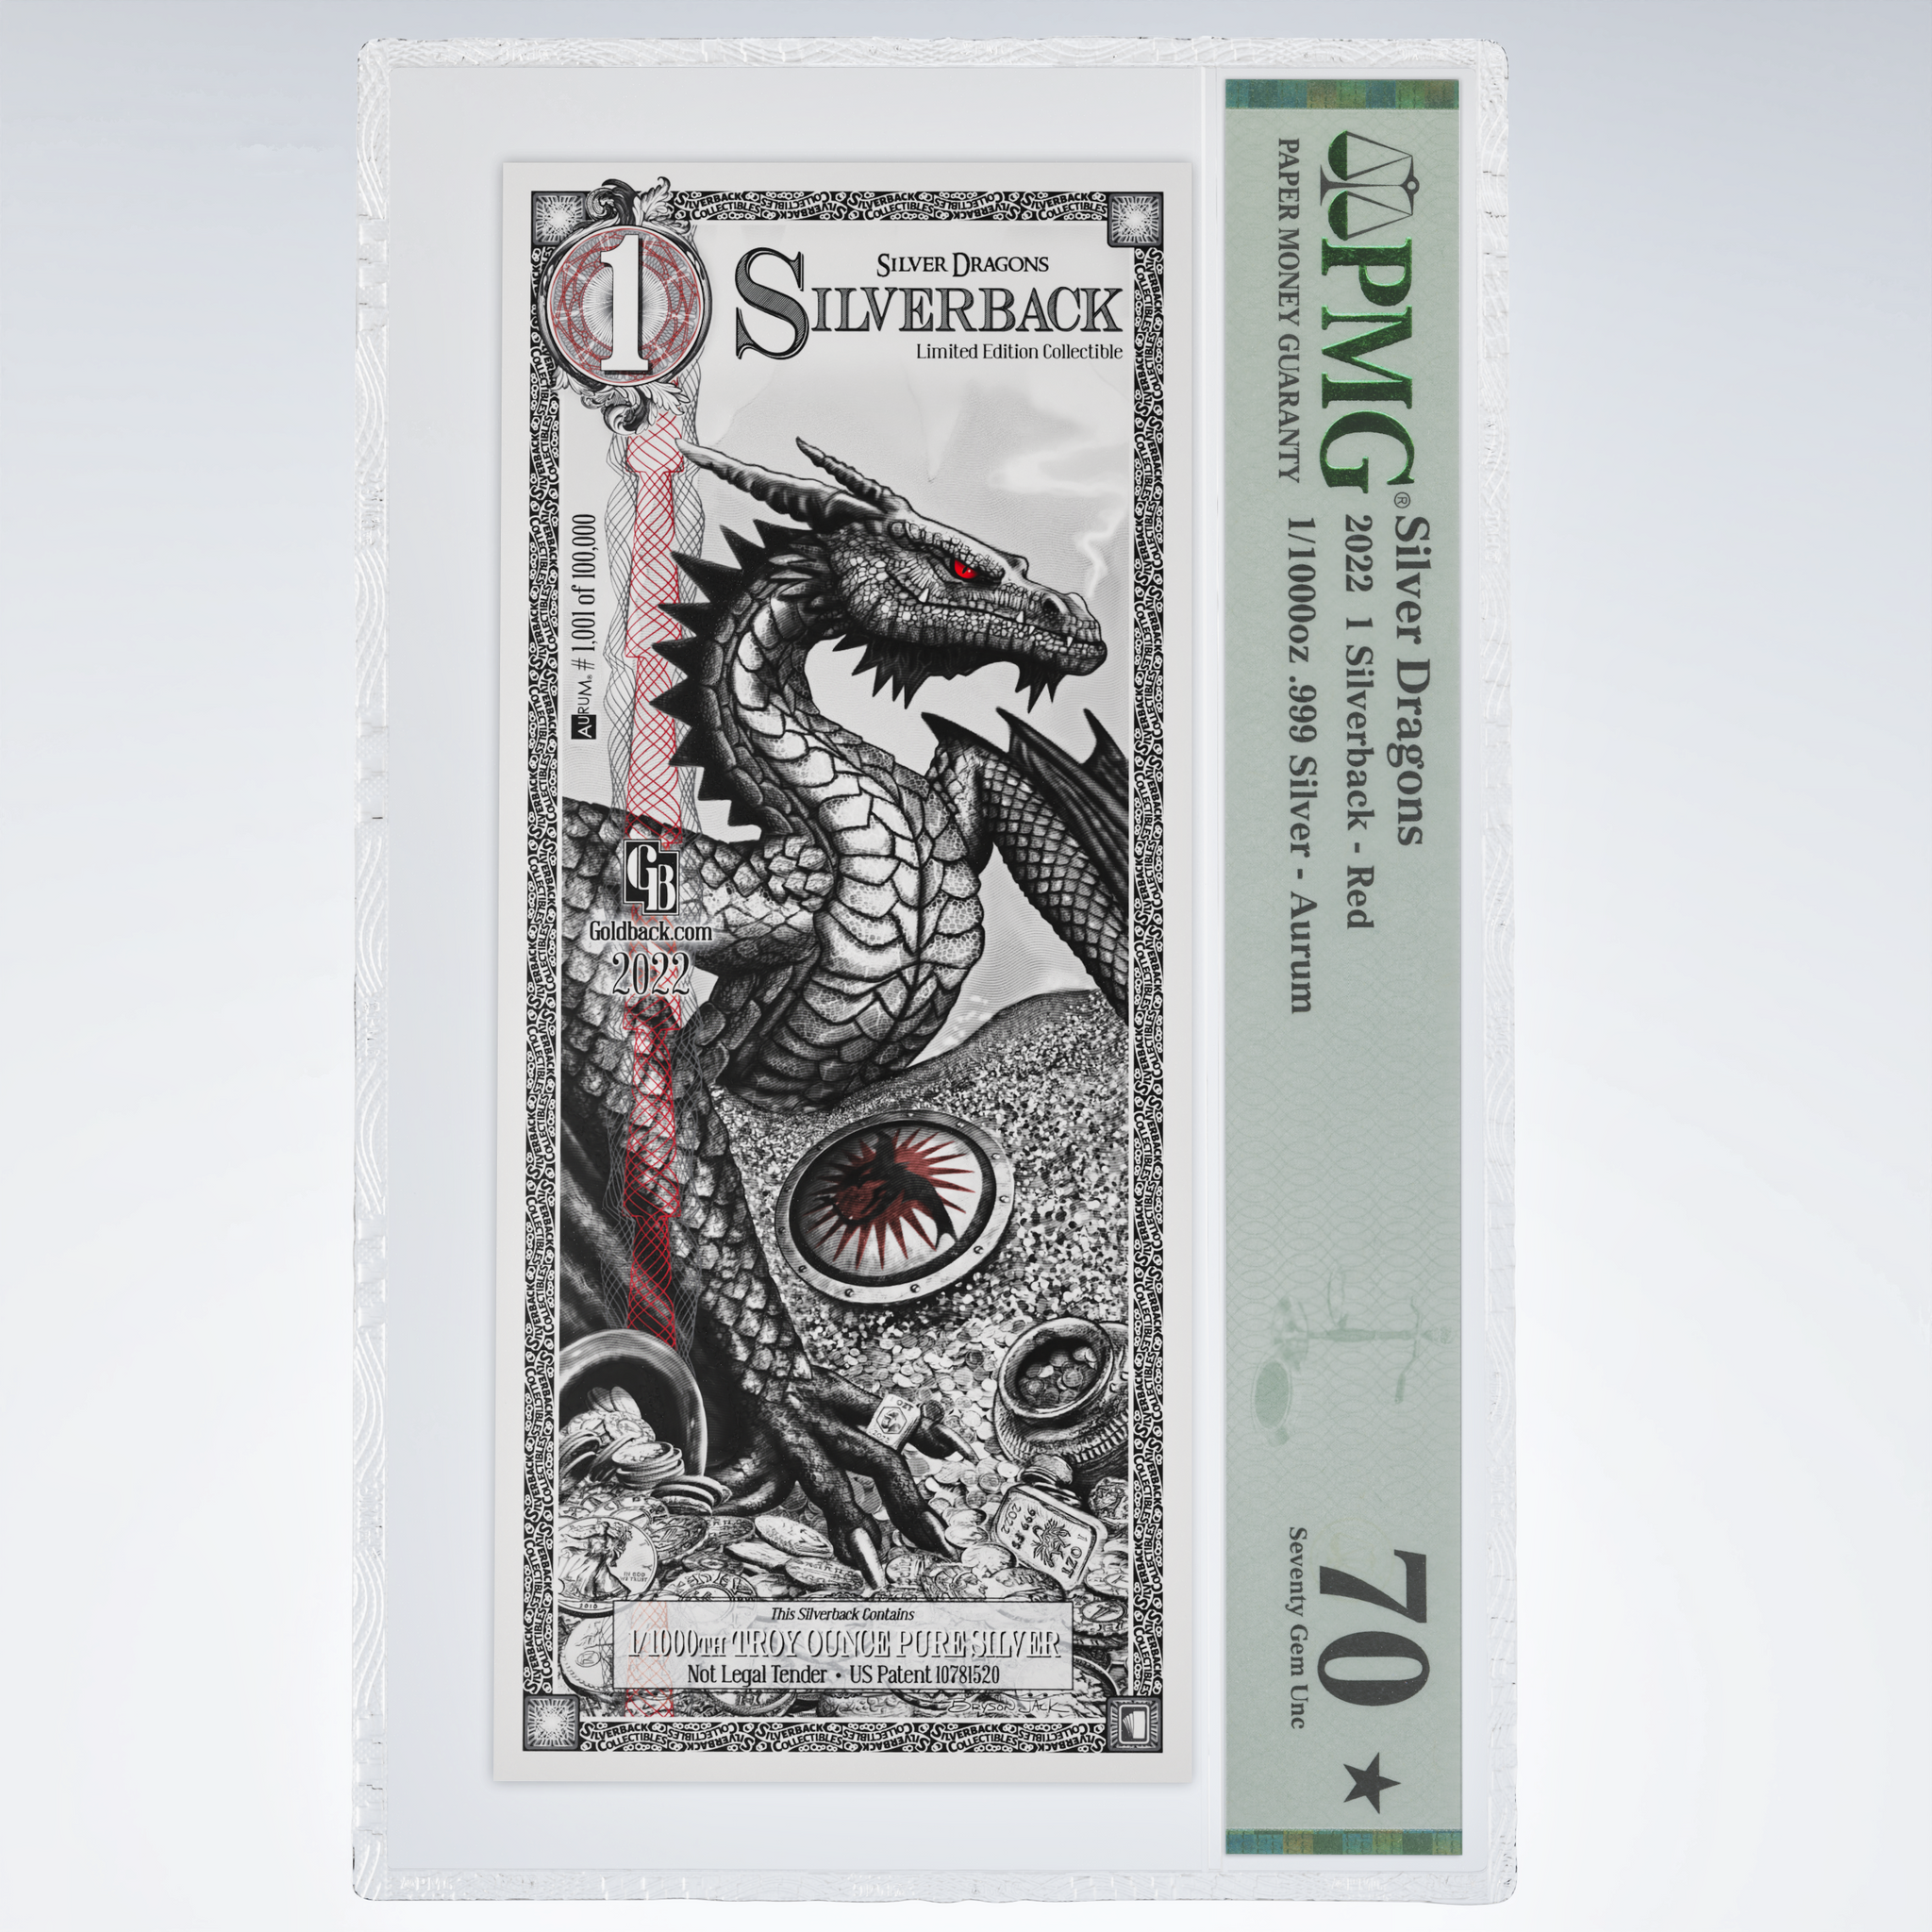 Silverback - Silver Dragons (Red Edition) PMG 70 Silver Note 2022 - OZB